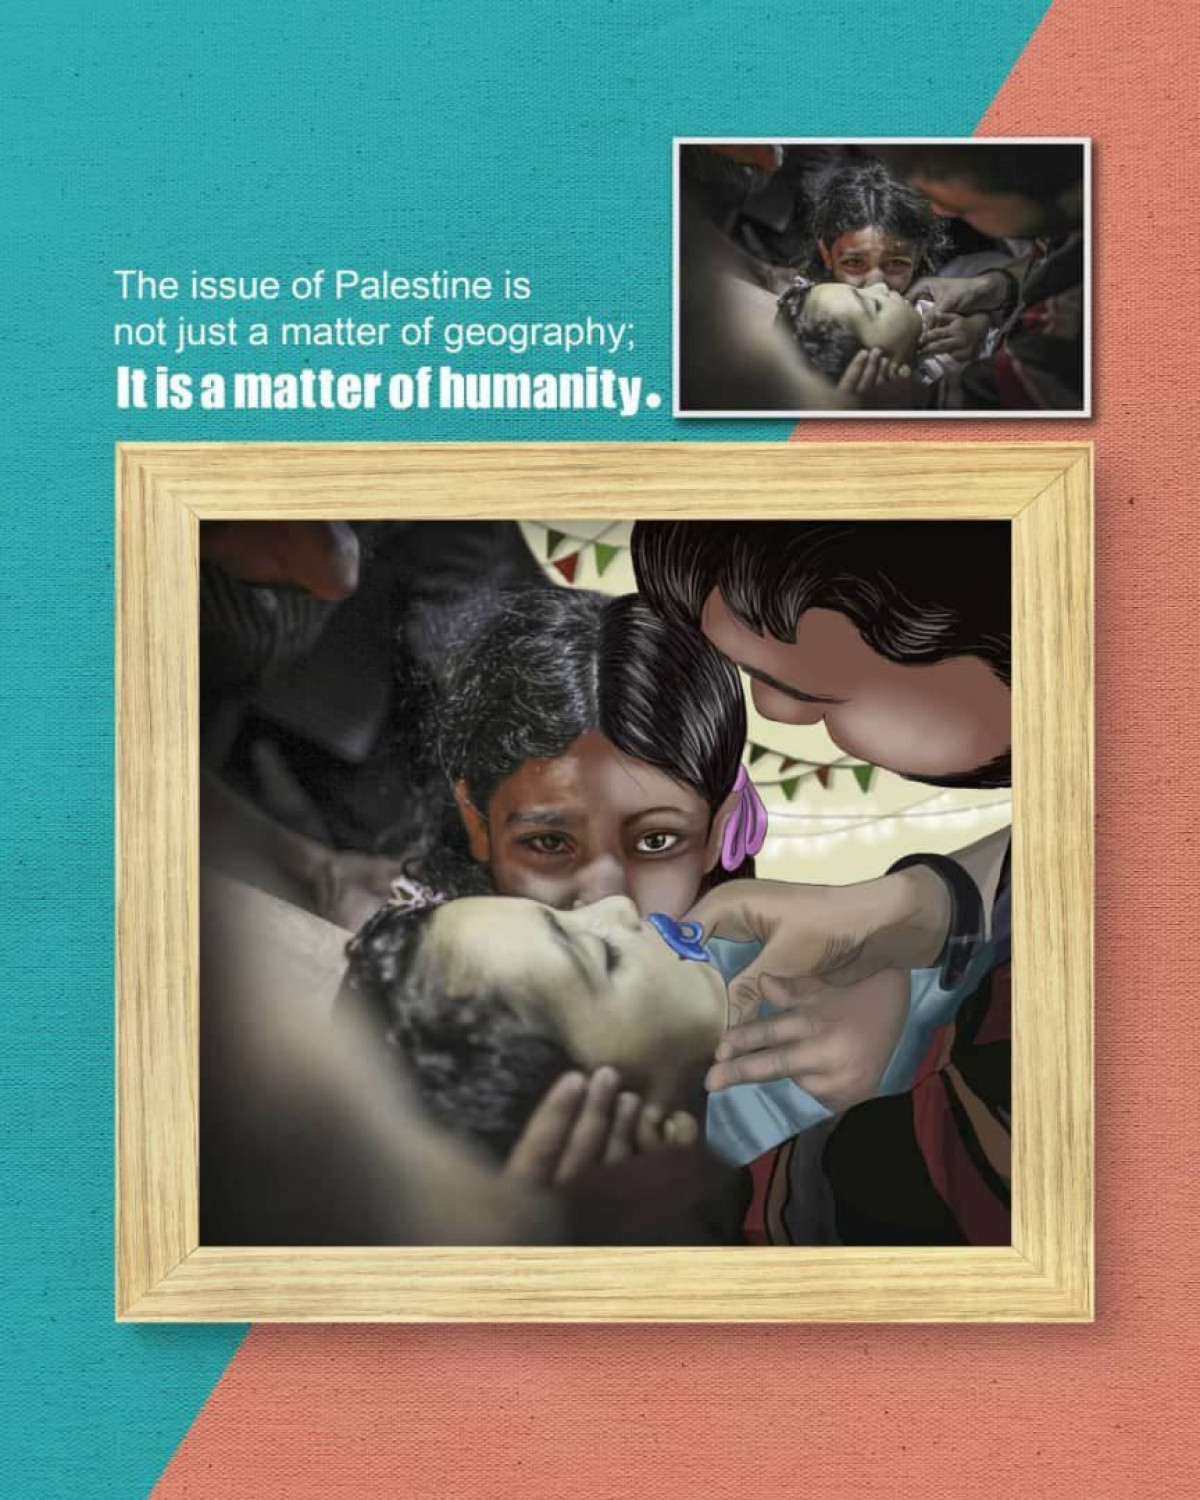 The issue of Palestine is not just a matter of geography: It is a matter of humanity.